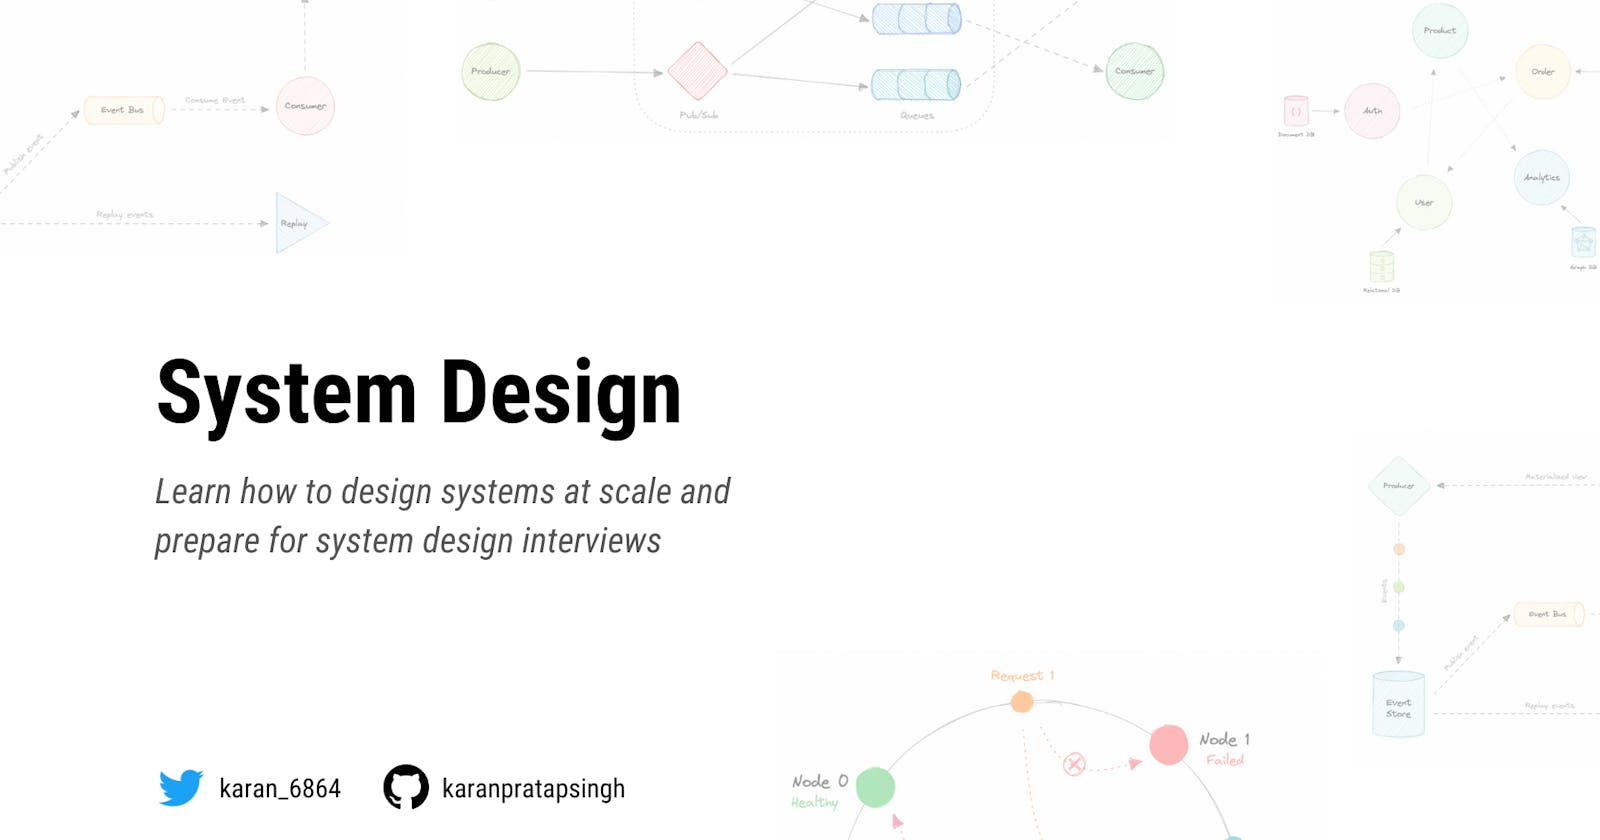 System Design: The complete course